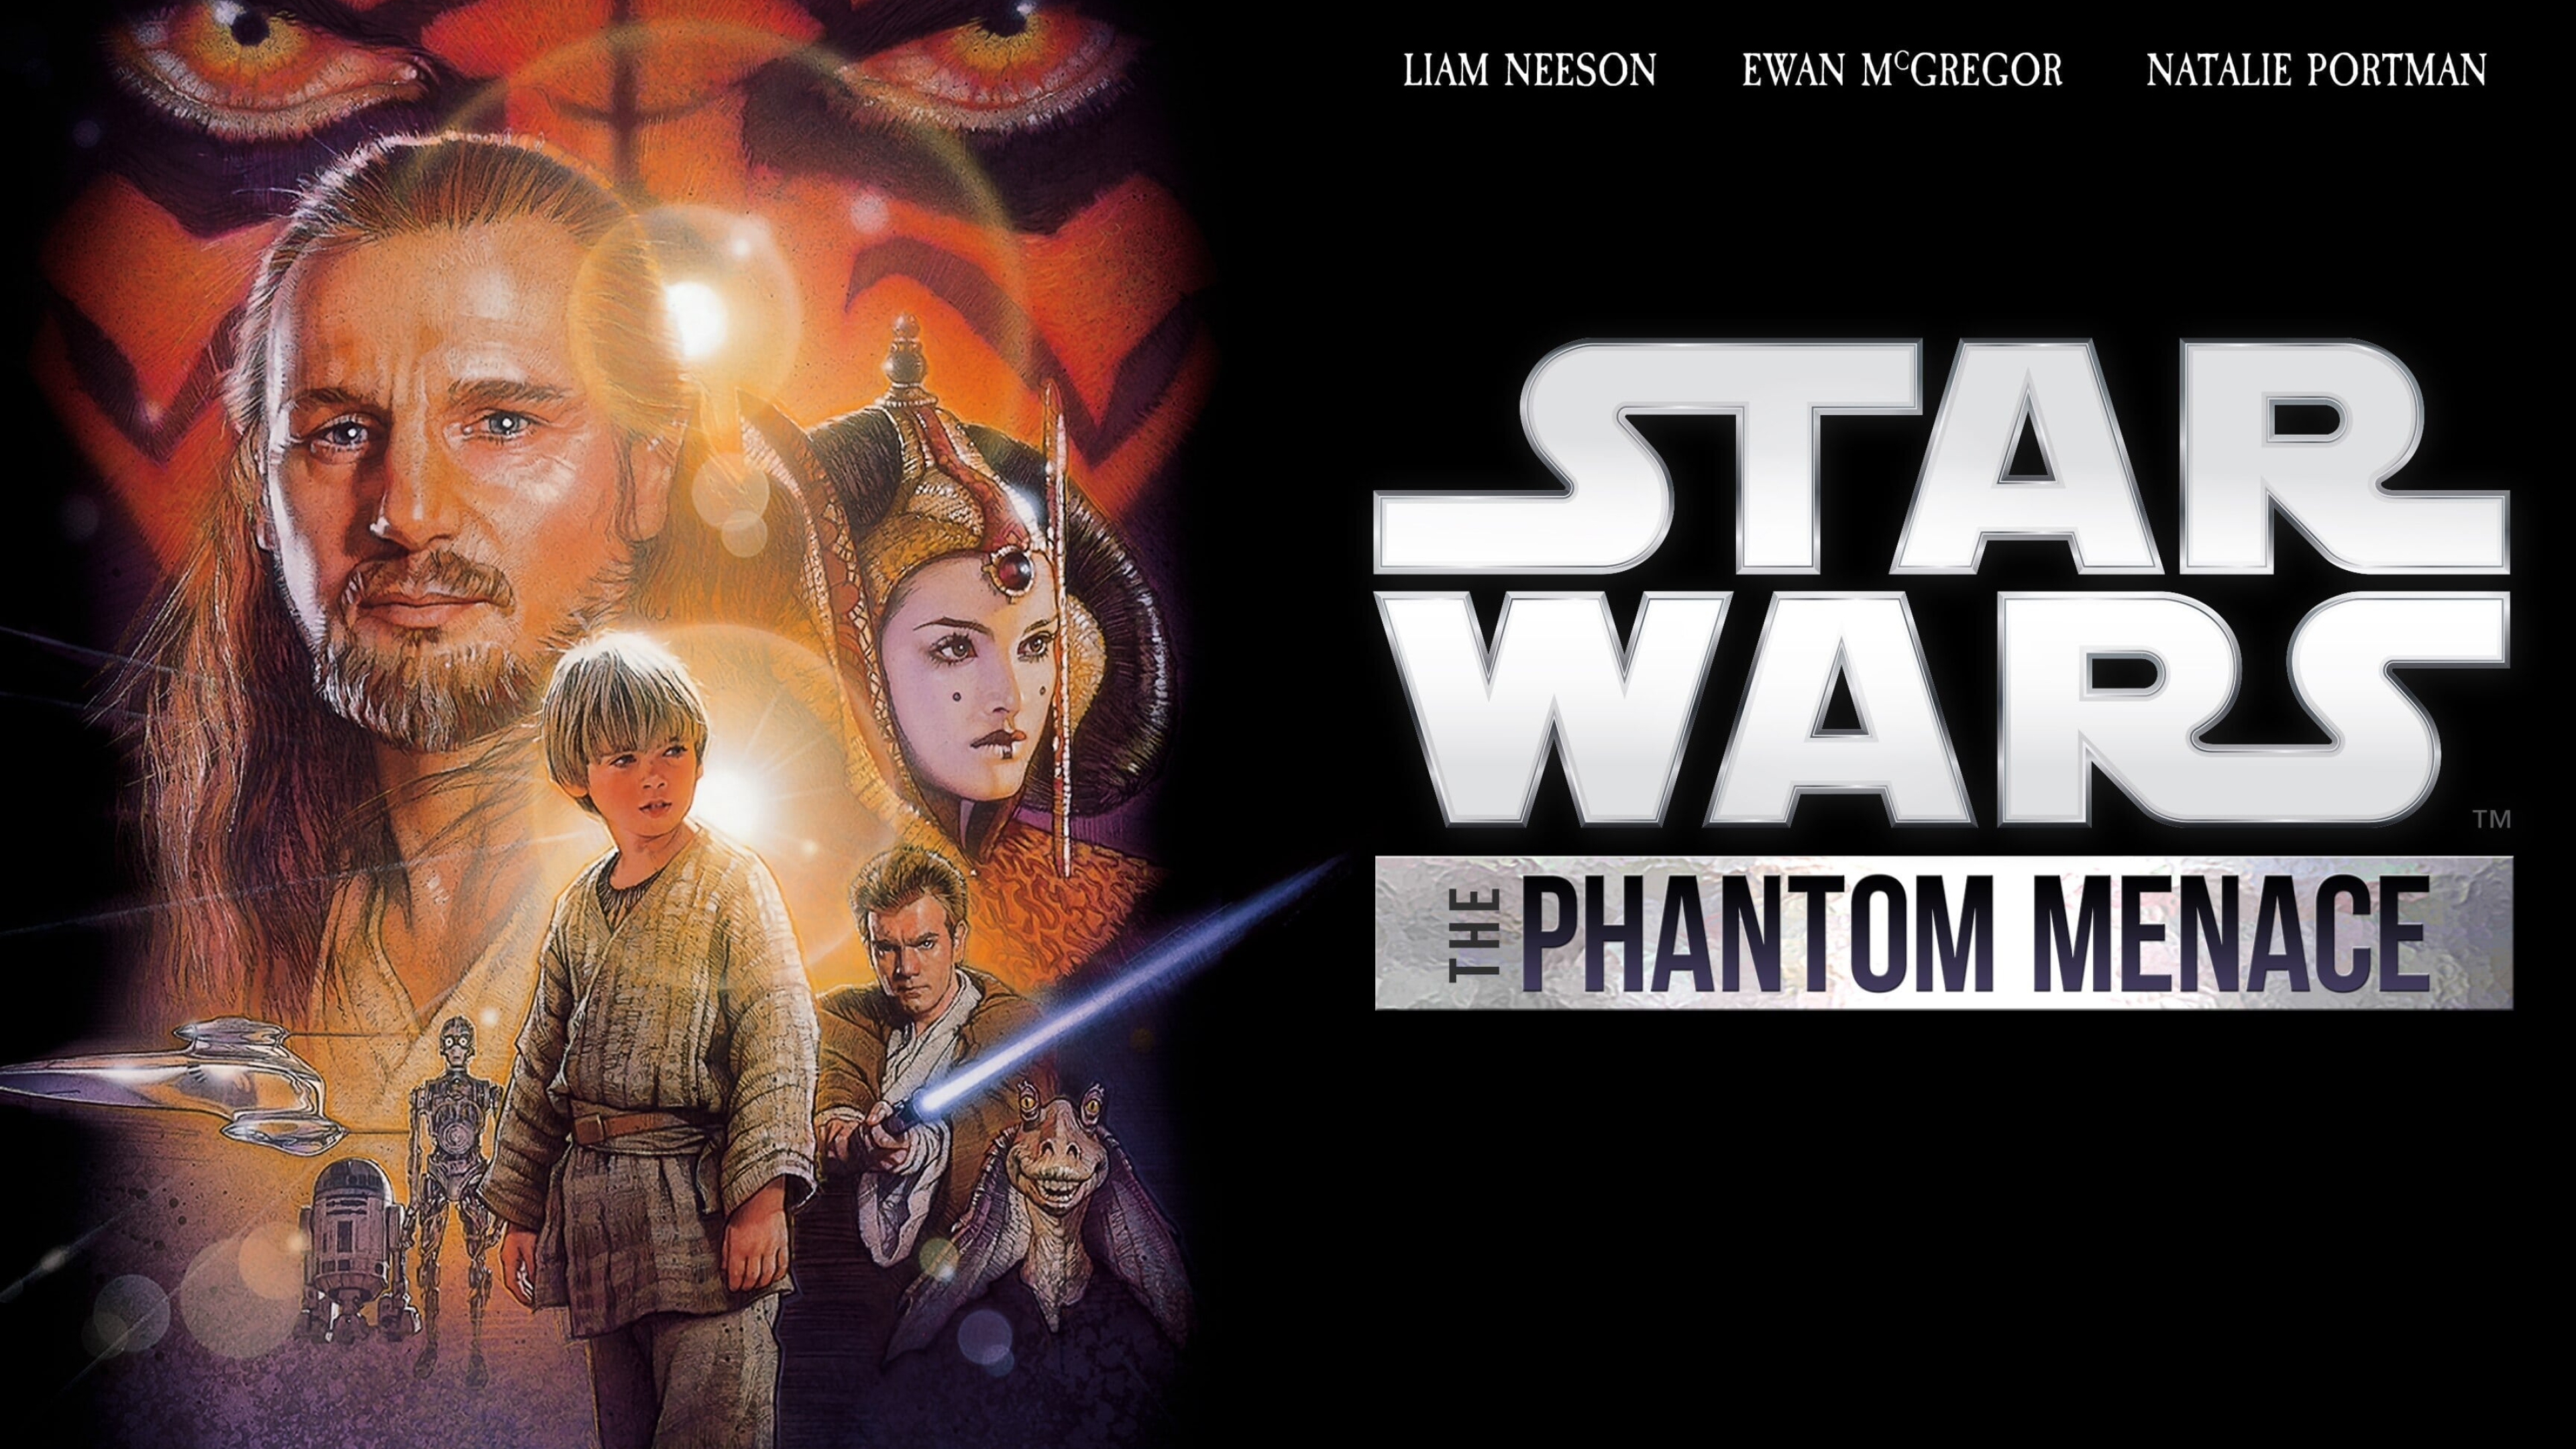 3840x2160 30+ Star Wars Episode I: The Phantom Menace HD Wallpapers and Backgrounds